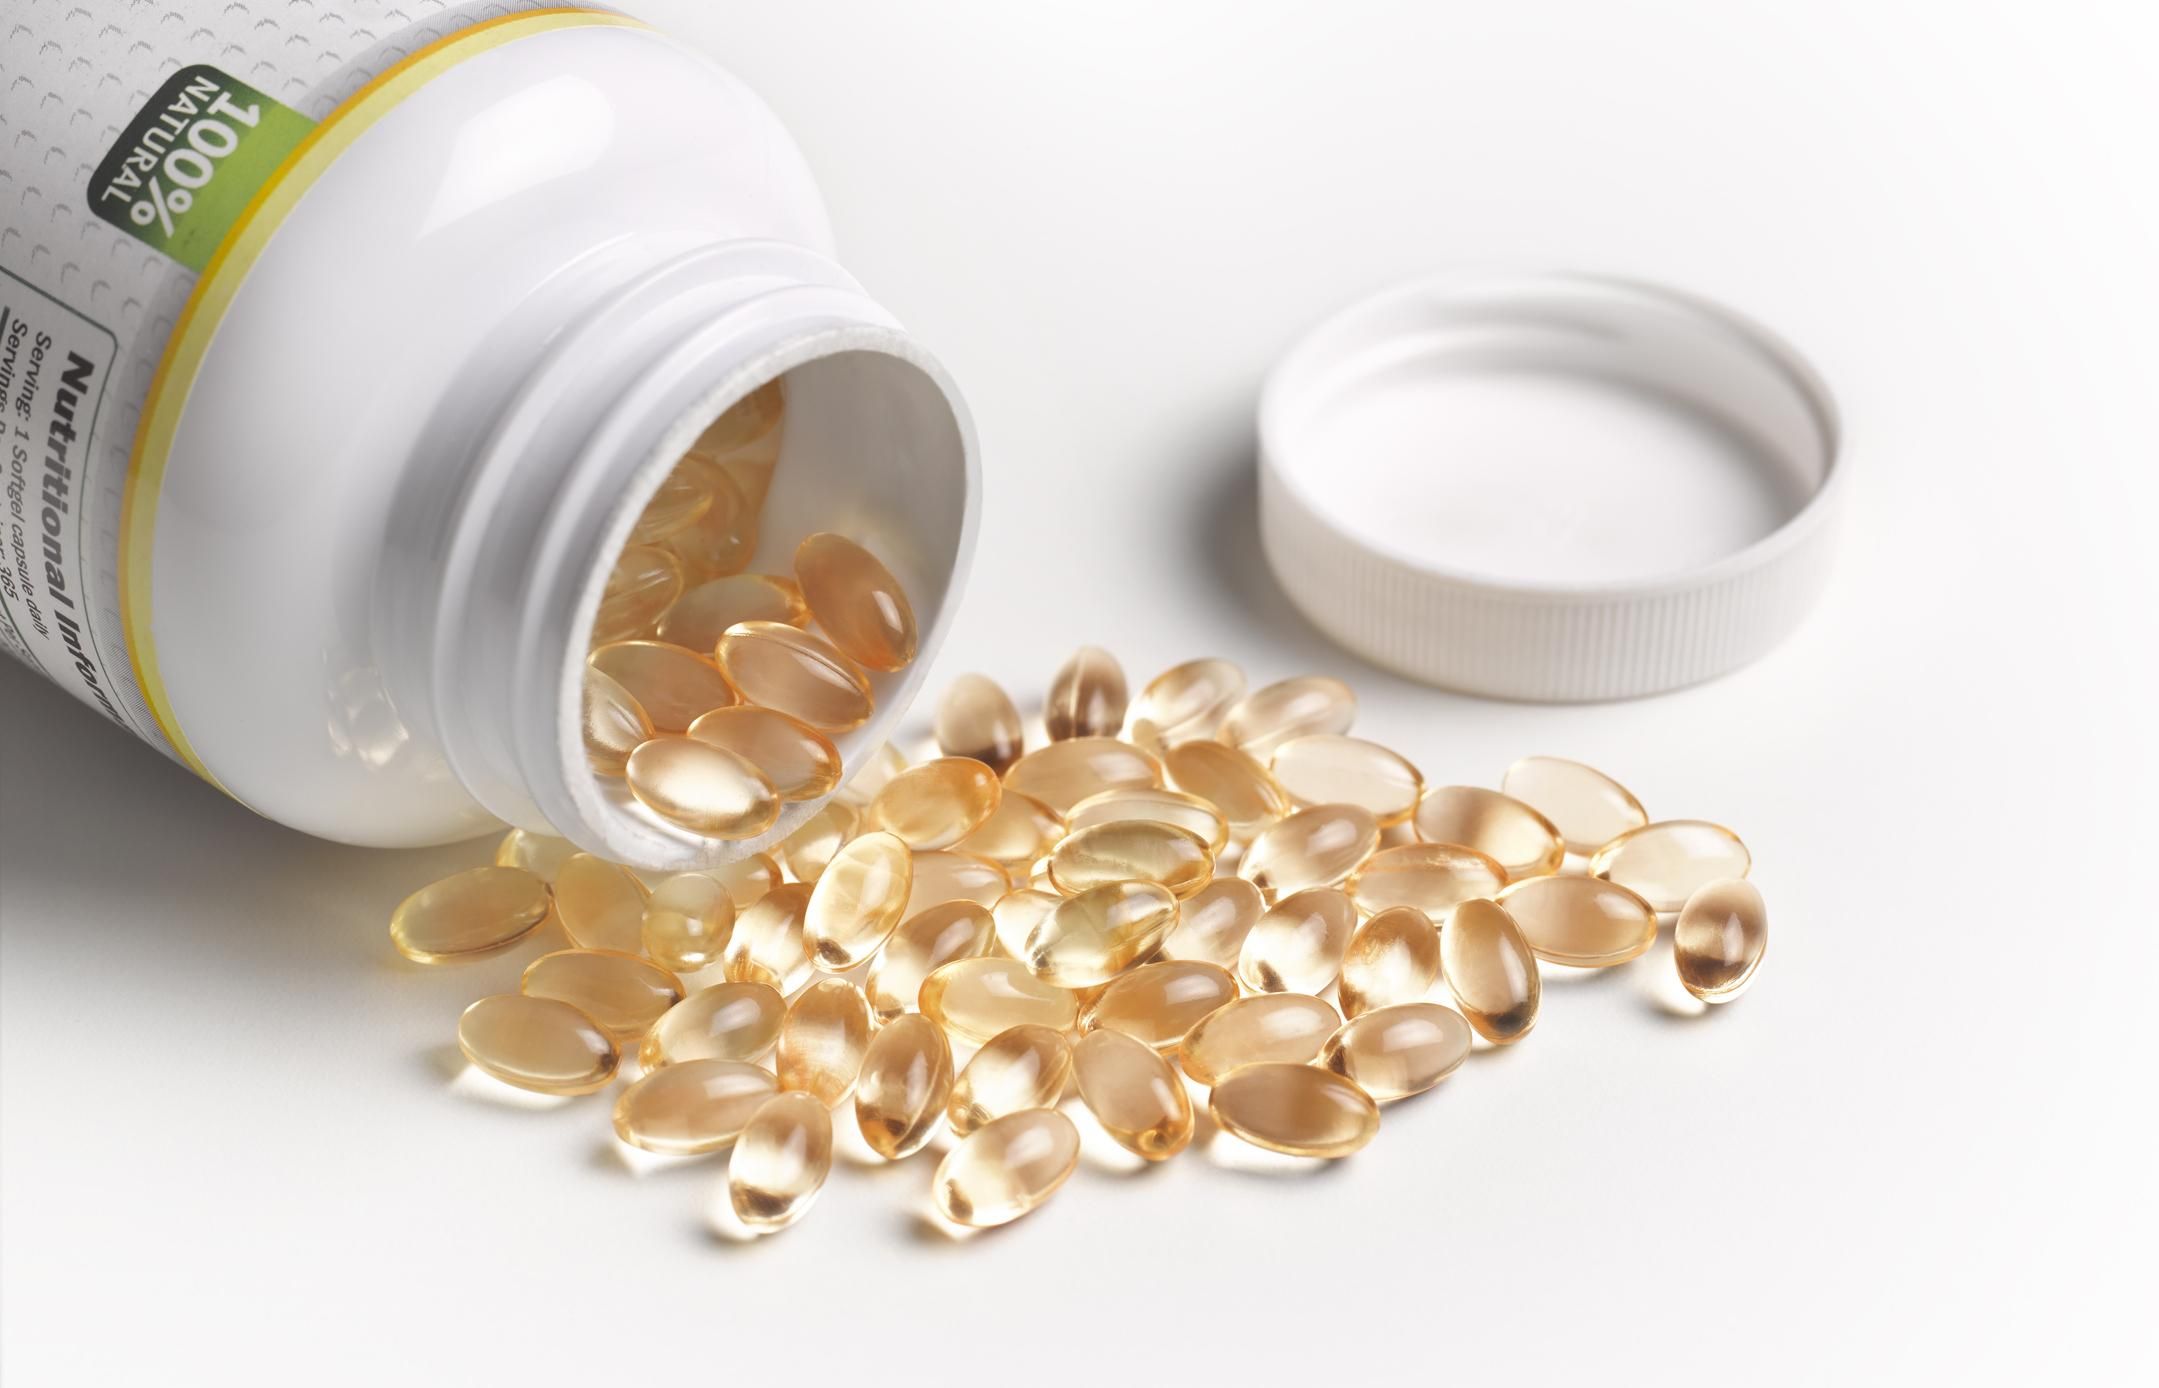 Vitamin D capsules tablets. (Photo: Getty/stock photo)